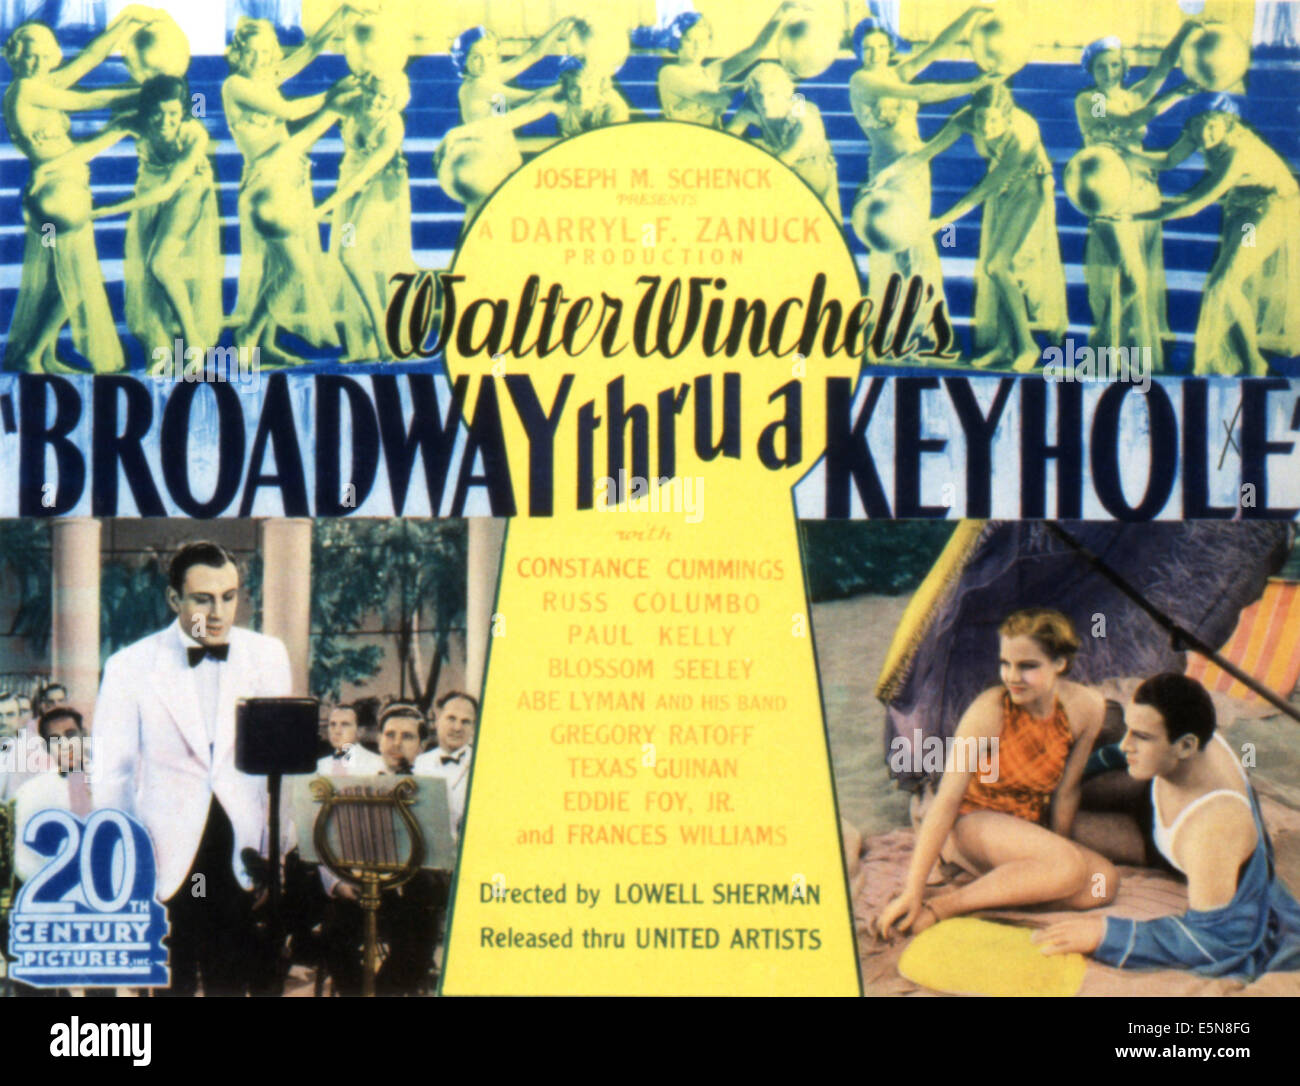 BROADWAY THROUGH A KEYHOLE, Russ Columbo, Constance Cummings, 1933. TM and Copyright © 20th Century Fox Film Corp. All rights Stock Photo